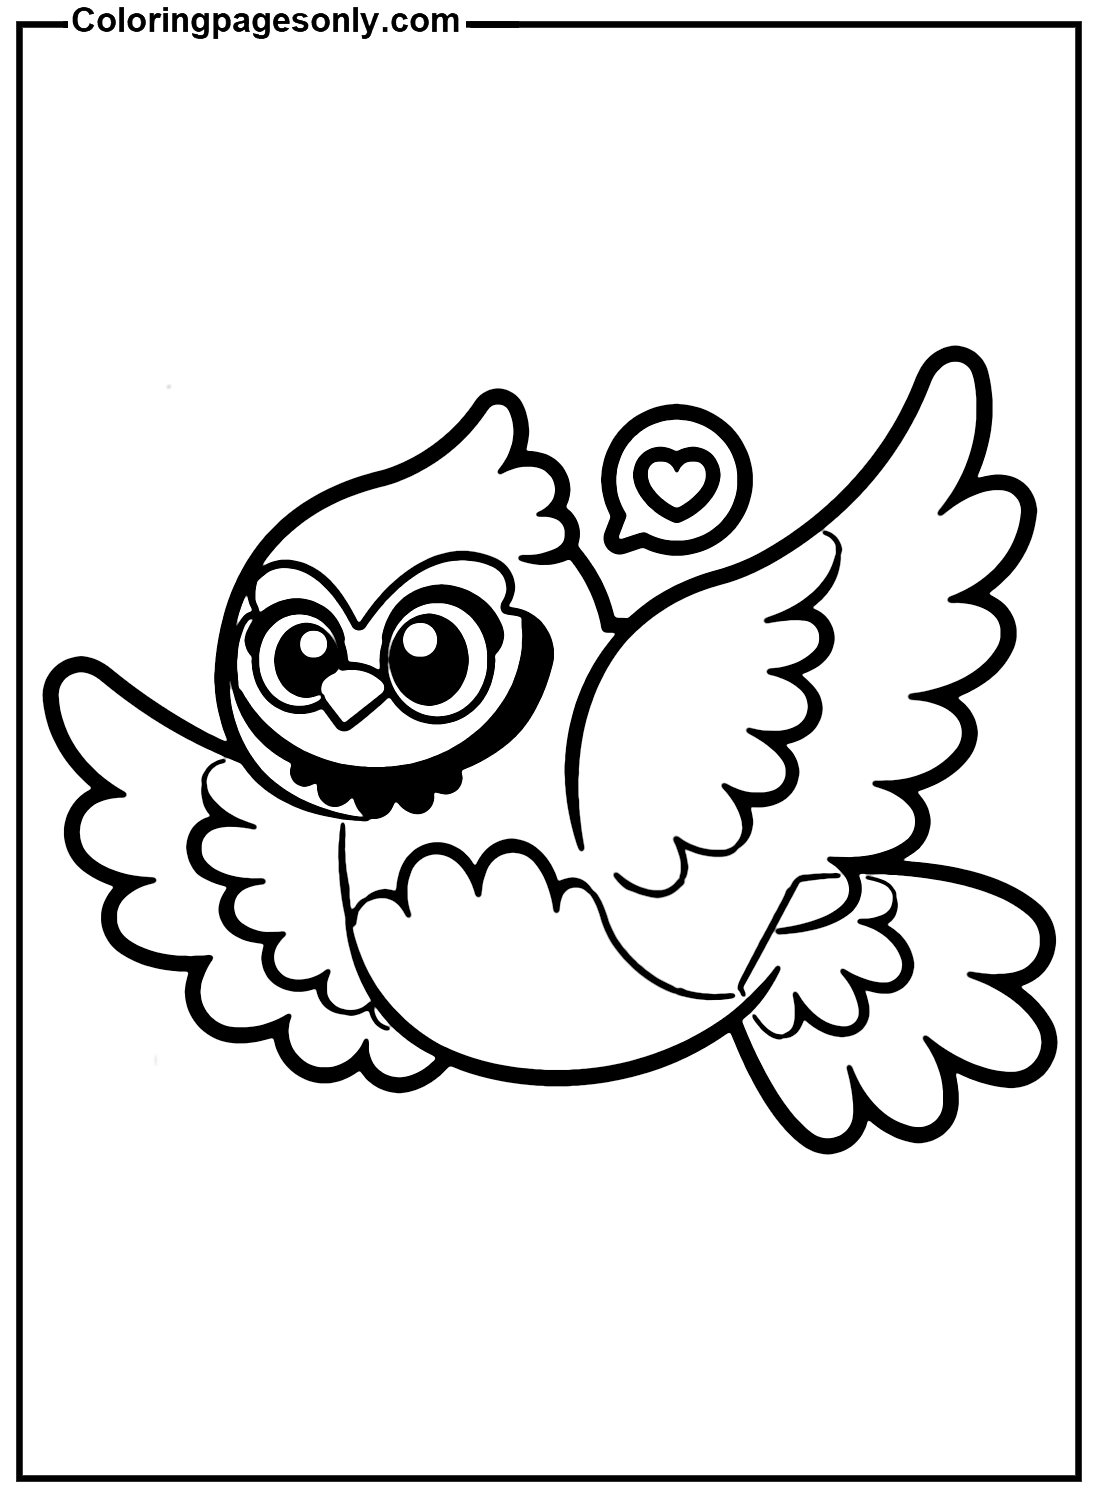 Cardinal Bird Picture Coloring Page